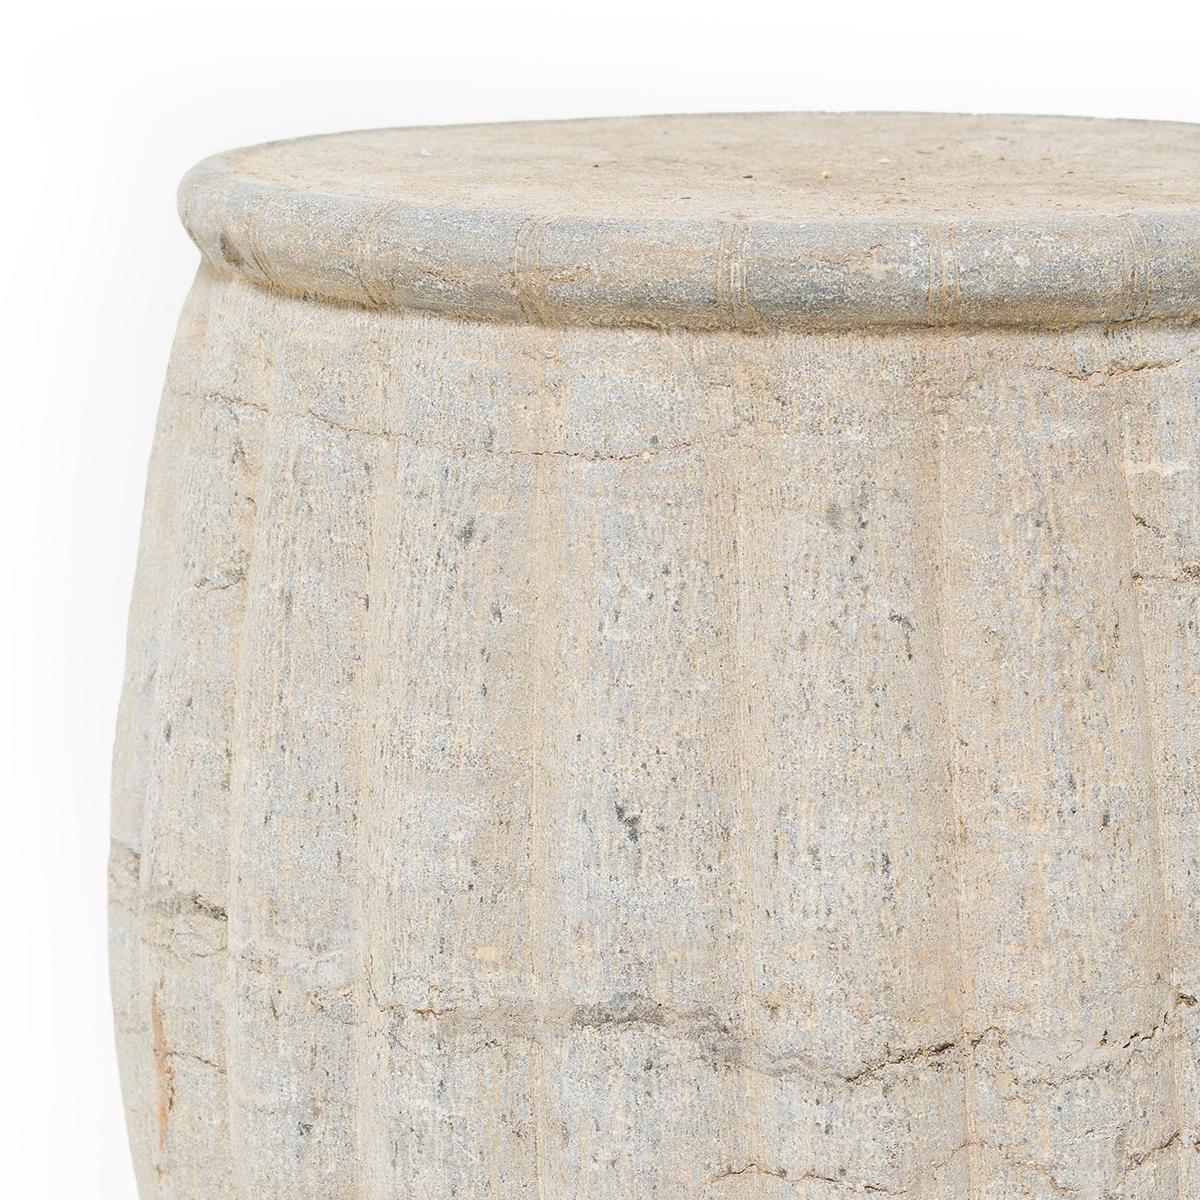 This large stone drum stool was carved from a solid block of limestone with a traditional melon design. Traditionally used as a place to rest one’s feet, stone drums are ideal as side tables or garden seating.

Multiple drums